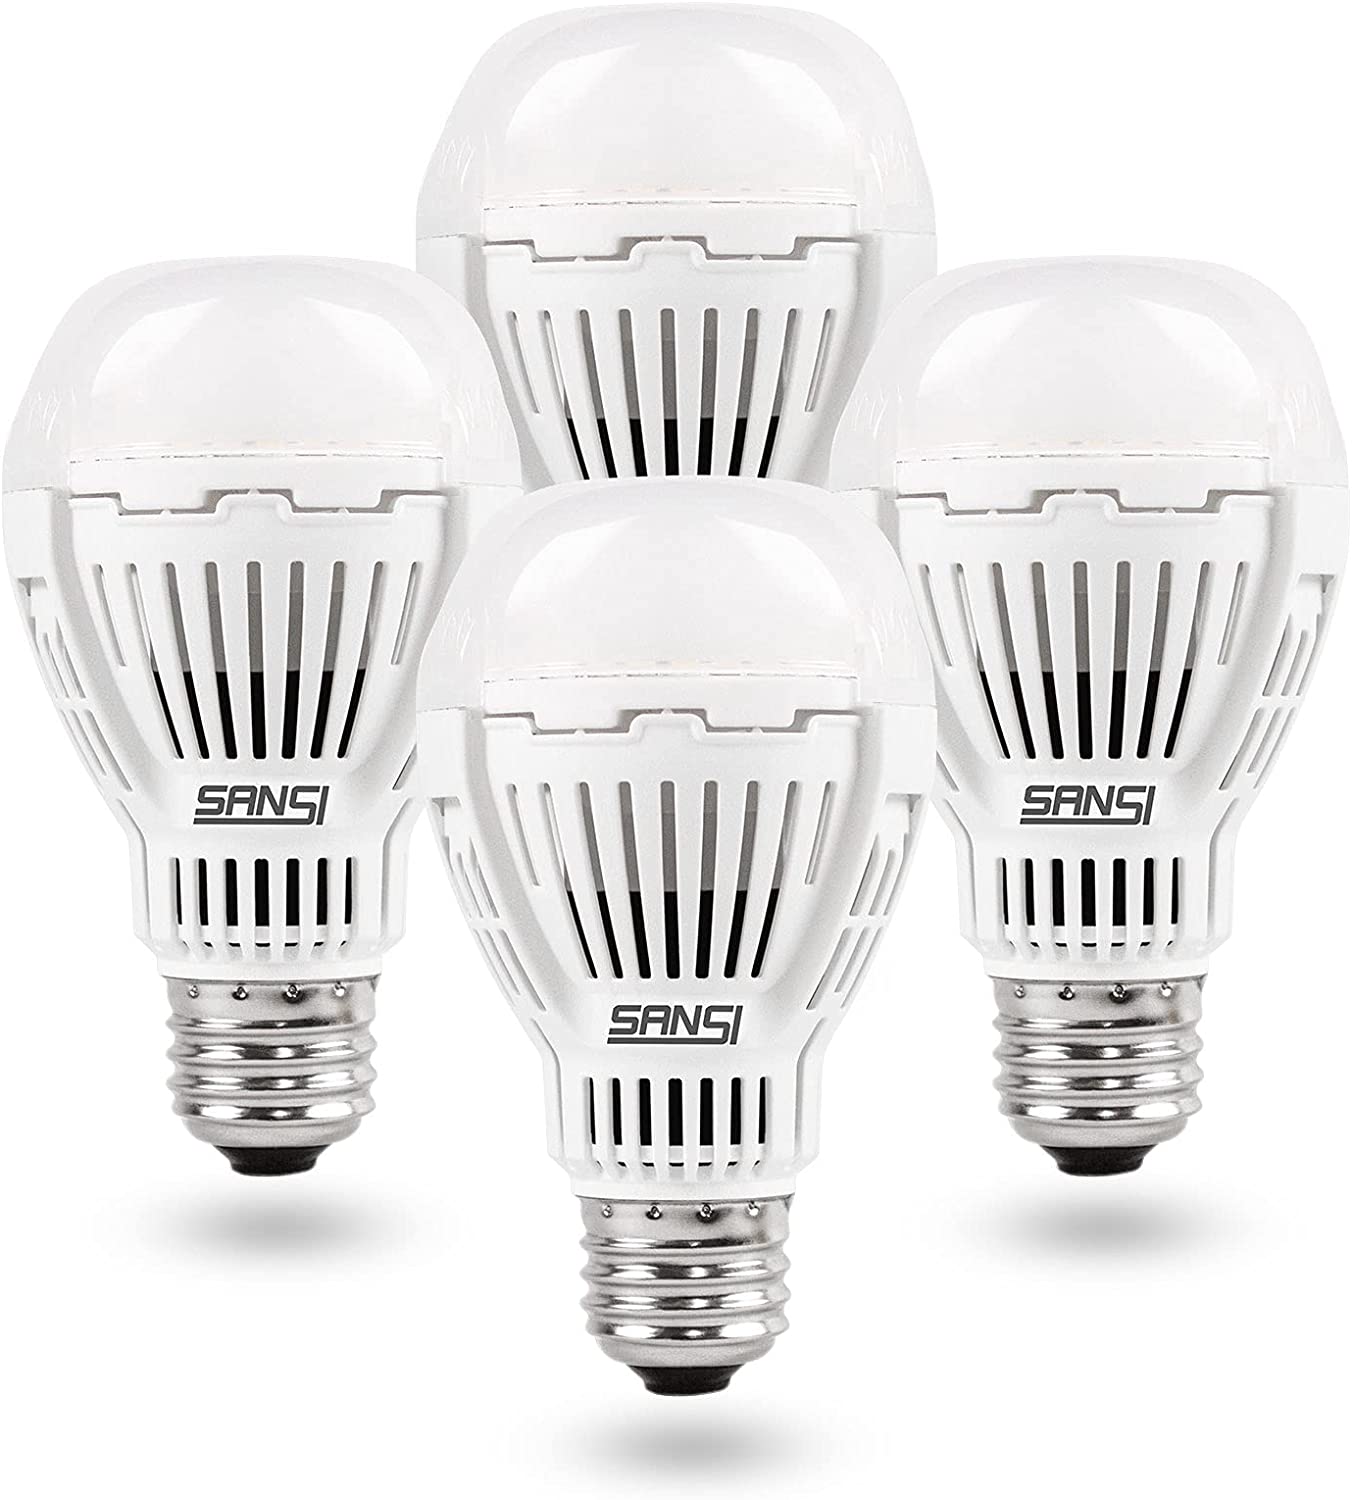 4-Pack Sansi 100W Equivalent LED Light Bulbs (Soft White, A19) $5.75 + Free Shipping w/ Prime or on $25+